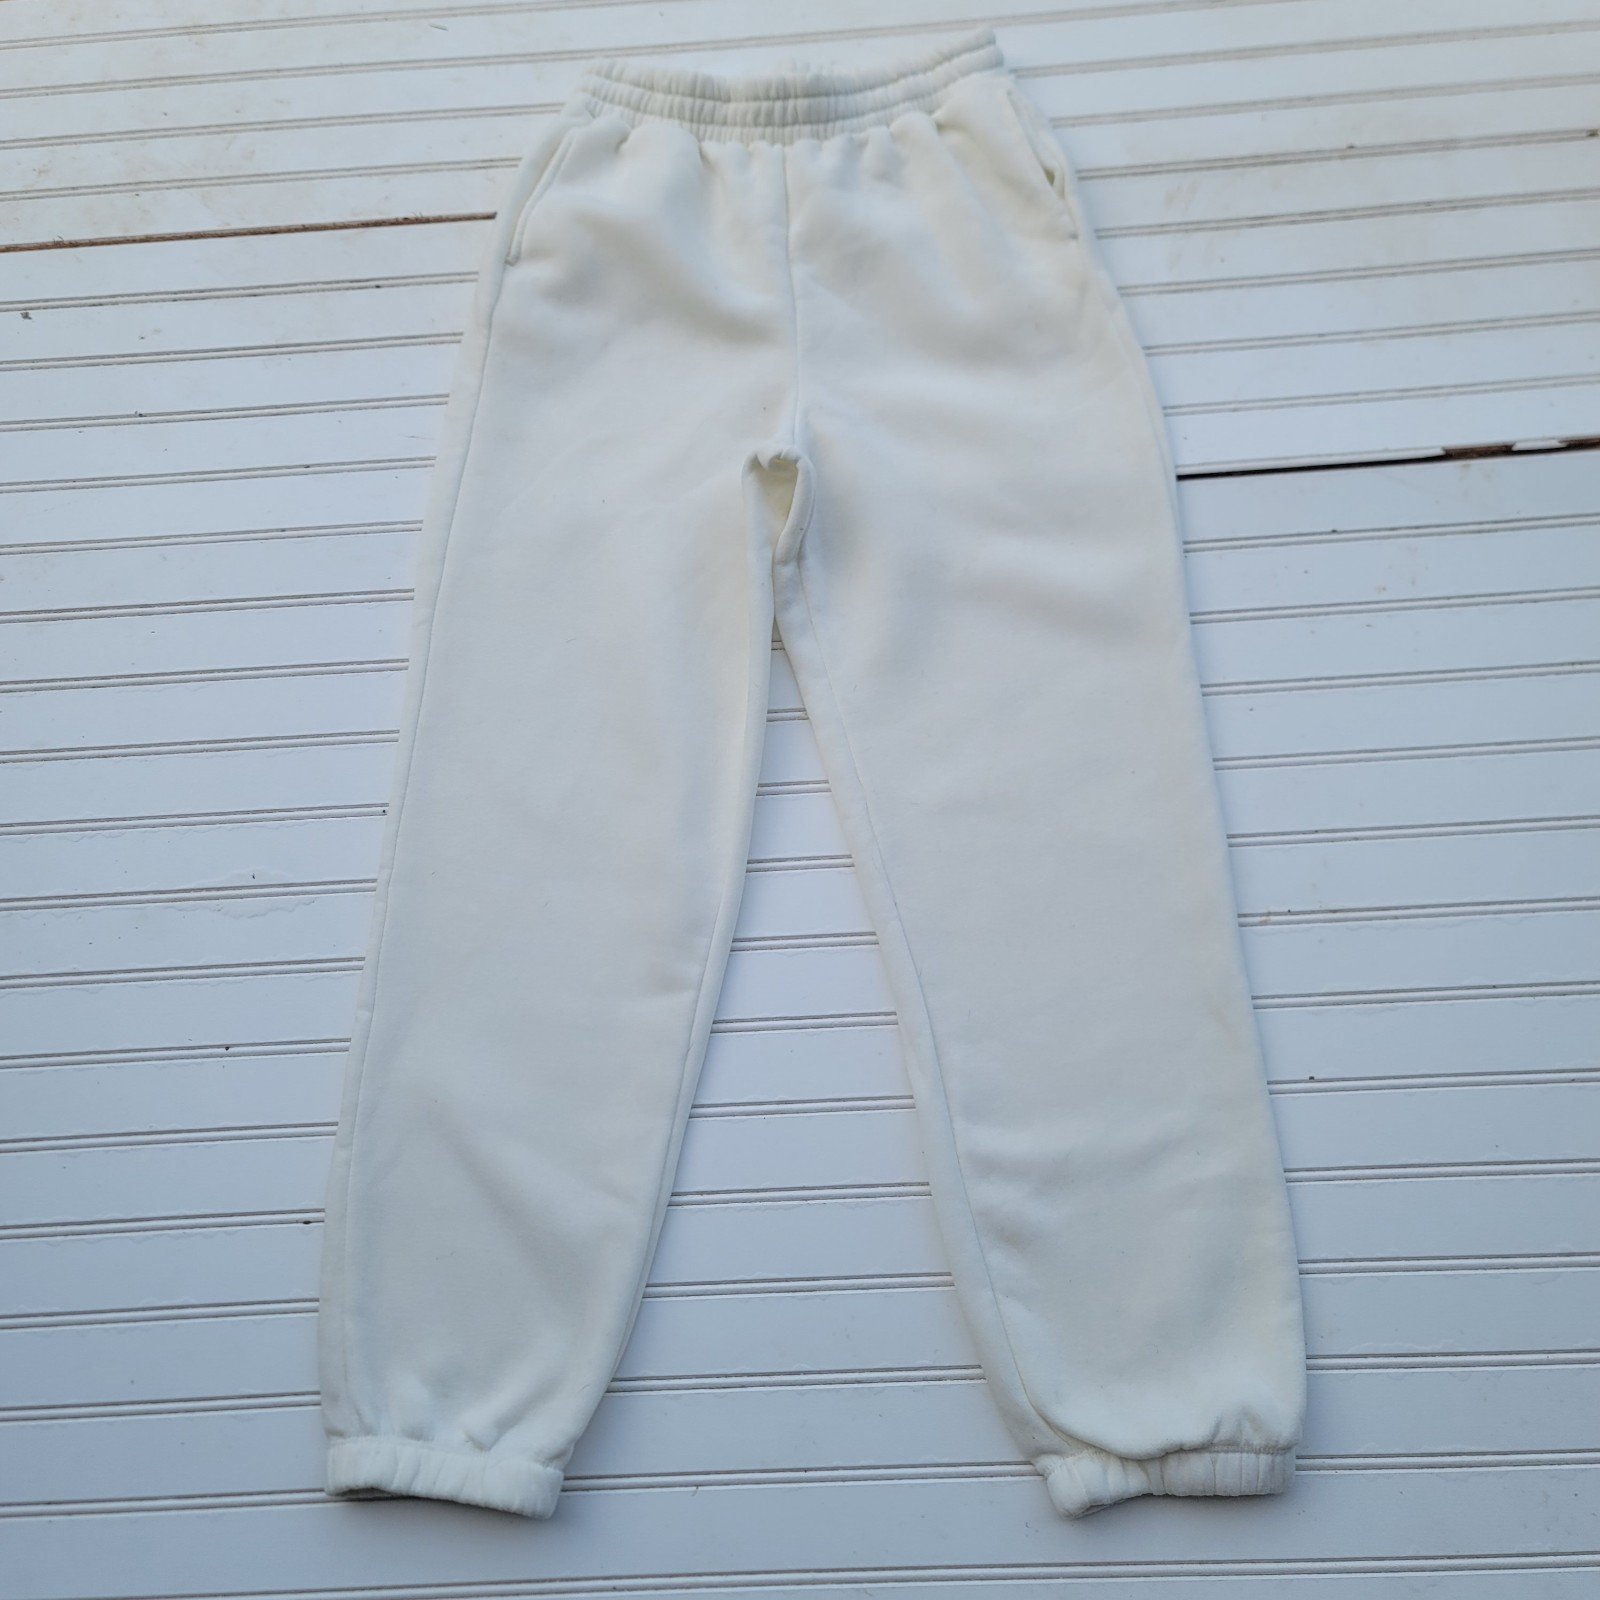 Perfect Simply Blessed Ivory Cream Cozy Fleece  Lined Jogger Sweatpants Elastic Waist M hC4oD3s05 Cheap